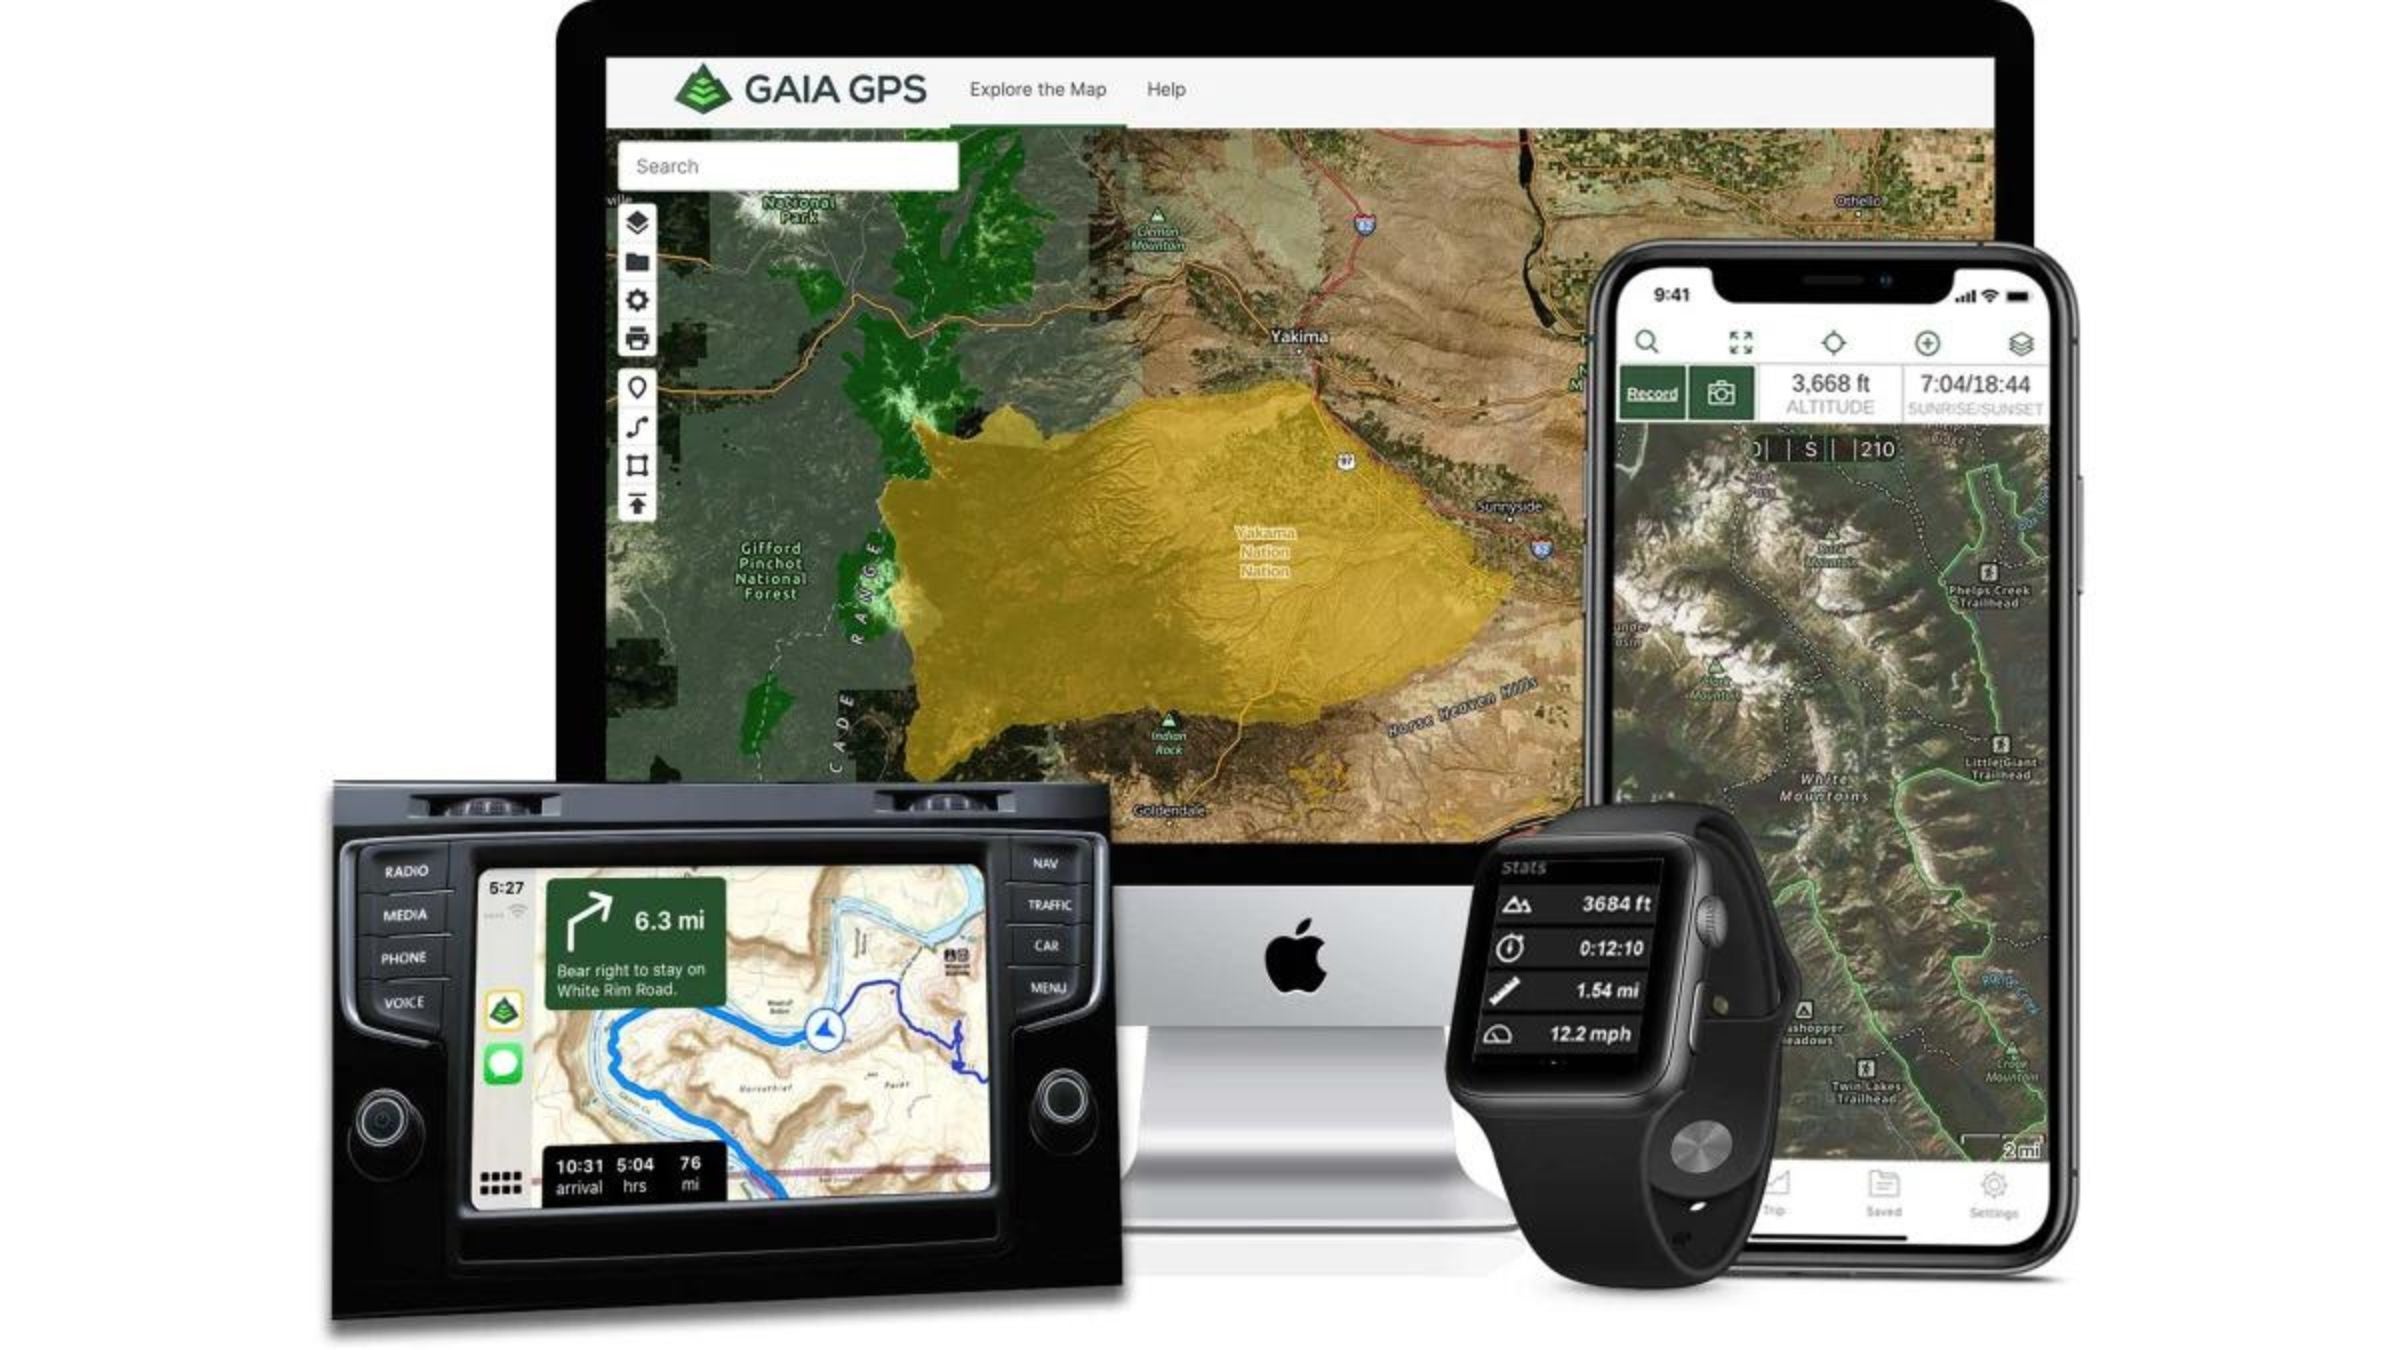 A Gaia GPS collection, part of the Triathlete Magazine subscription